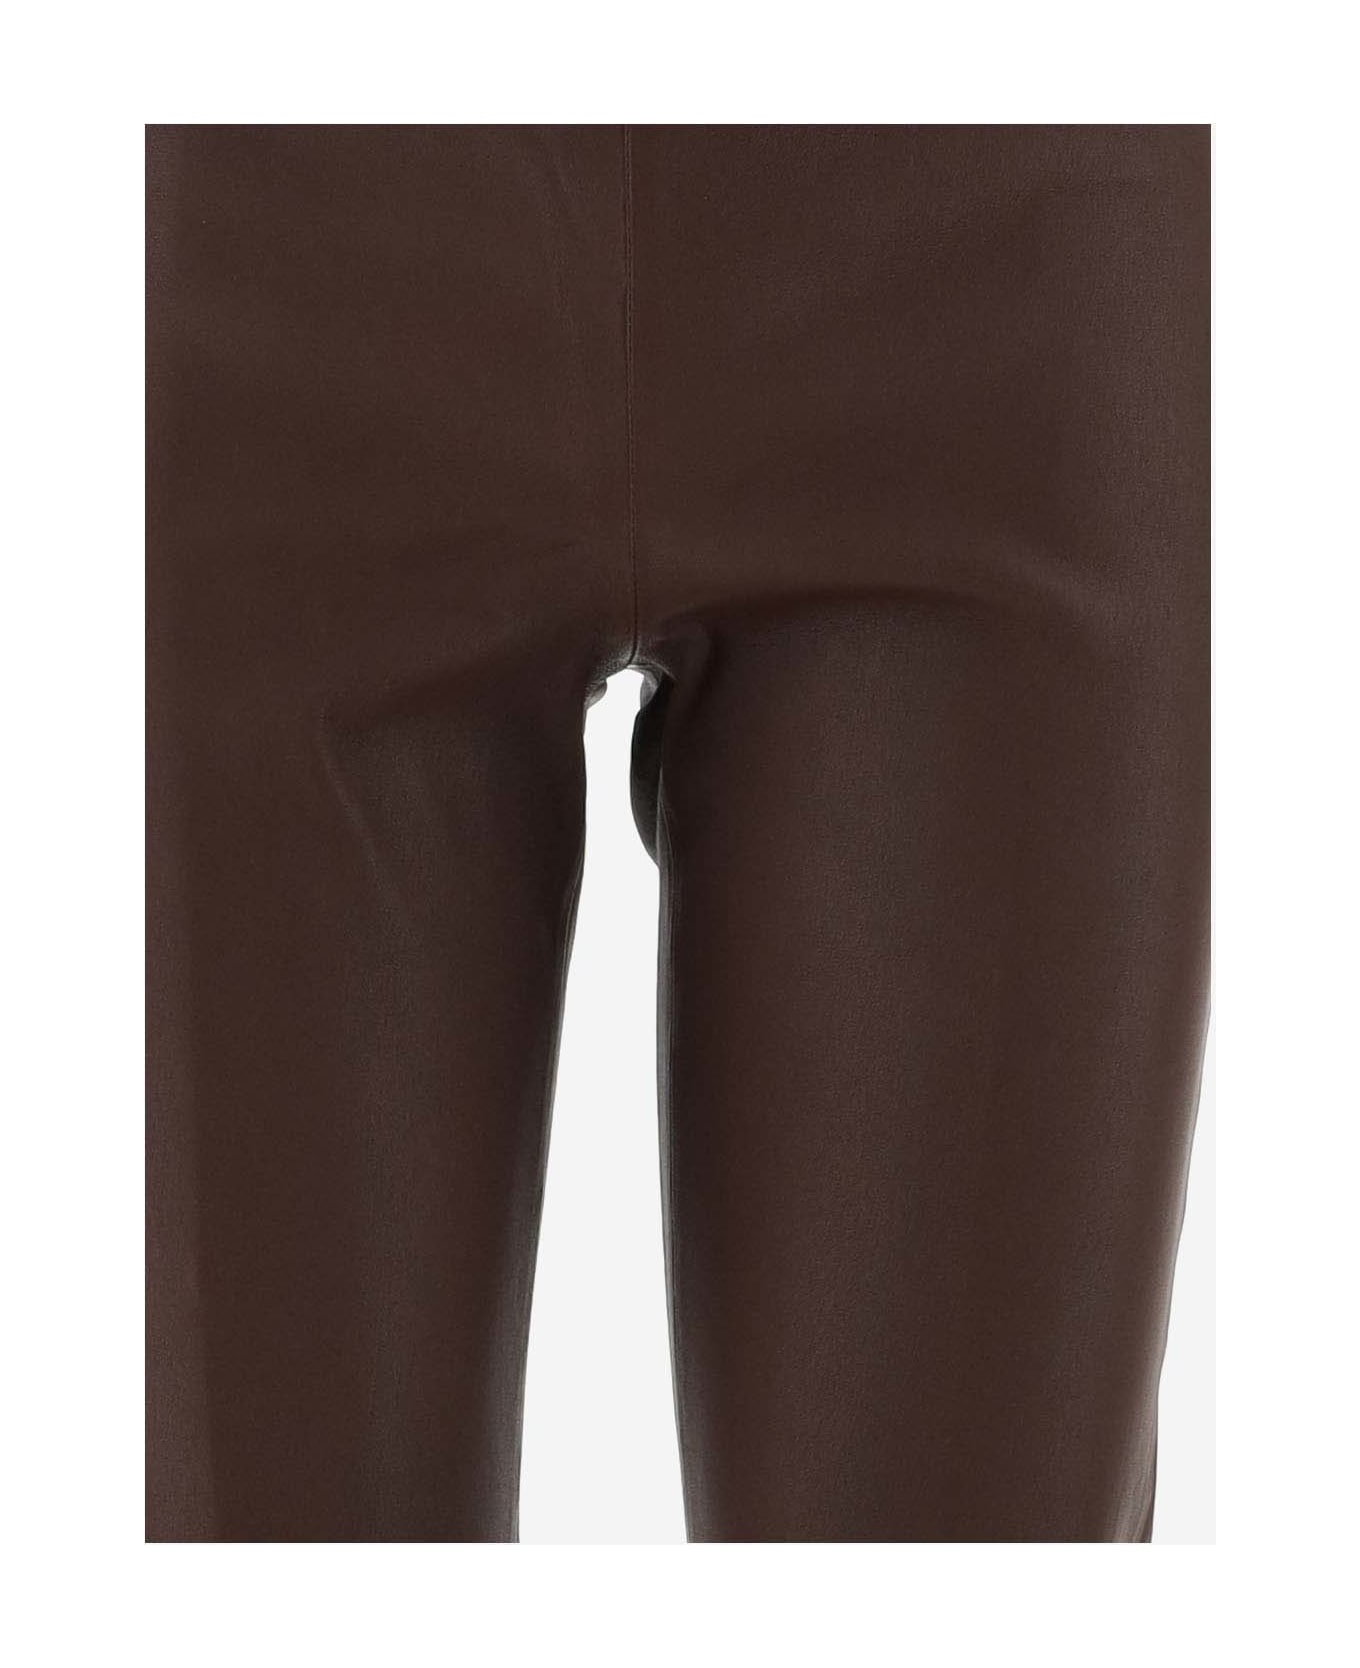 By Malene Birger Leather Trousers - CHESTNUT ボトムス